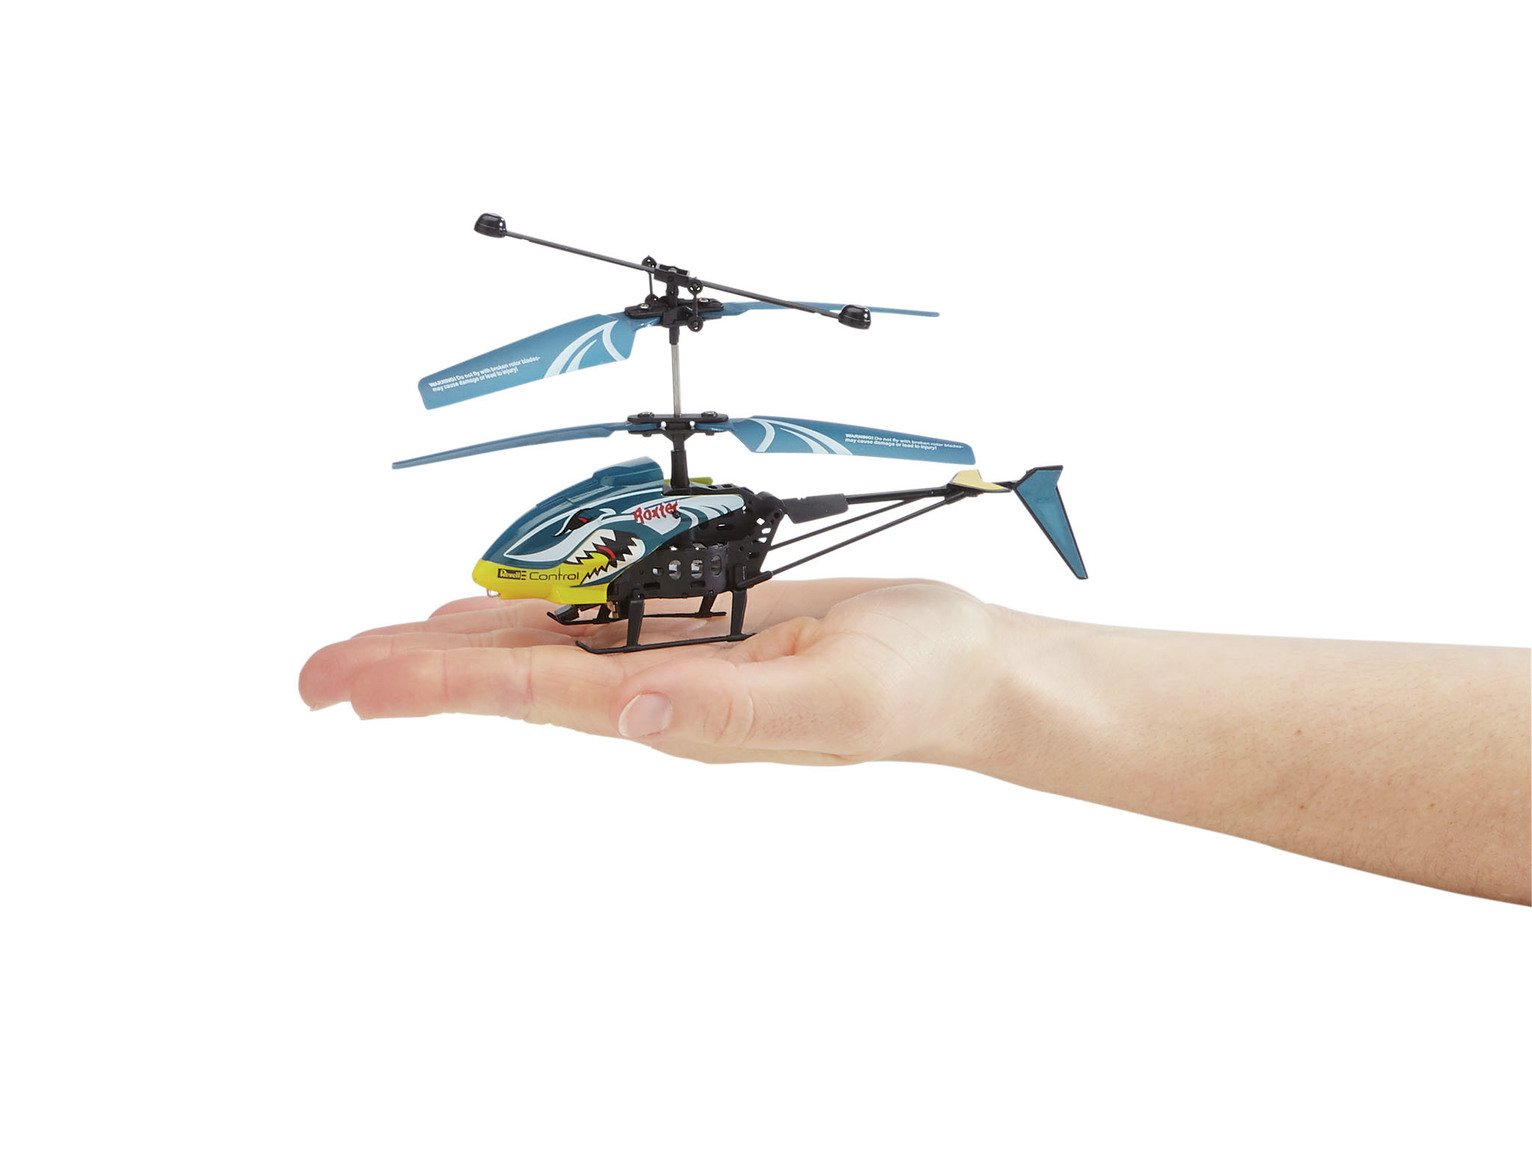 revell control helicopter roxter